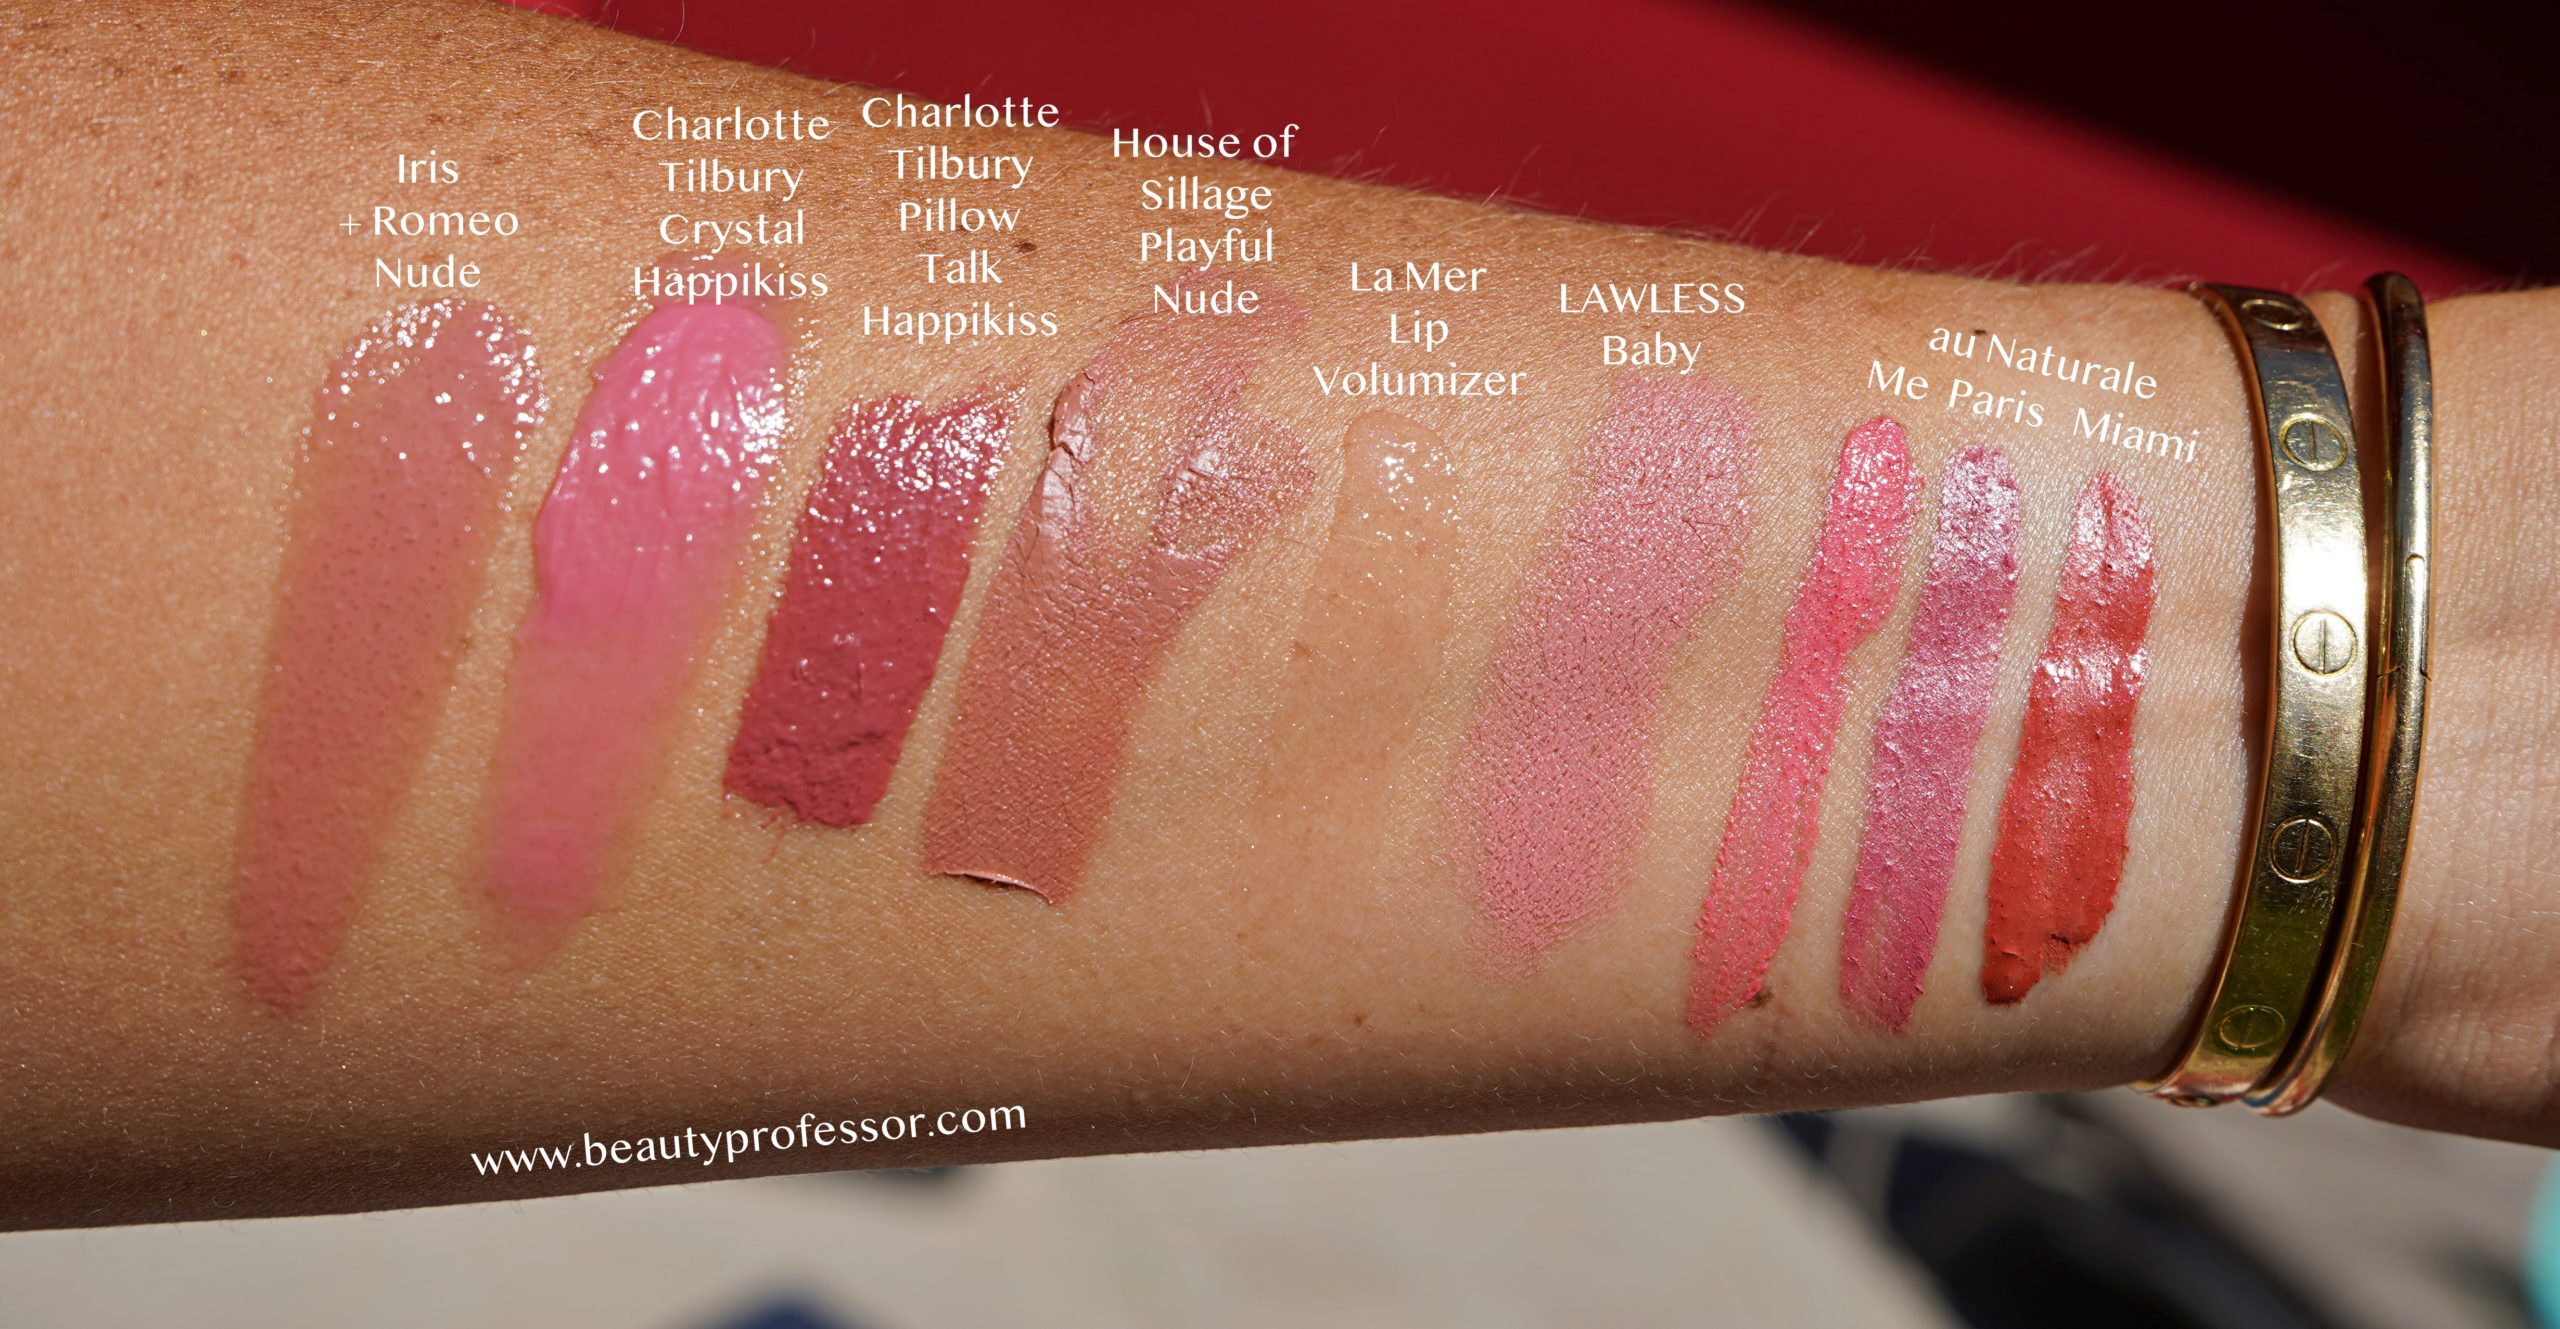 Lip color swatches in direct sunlight